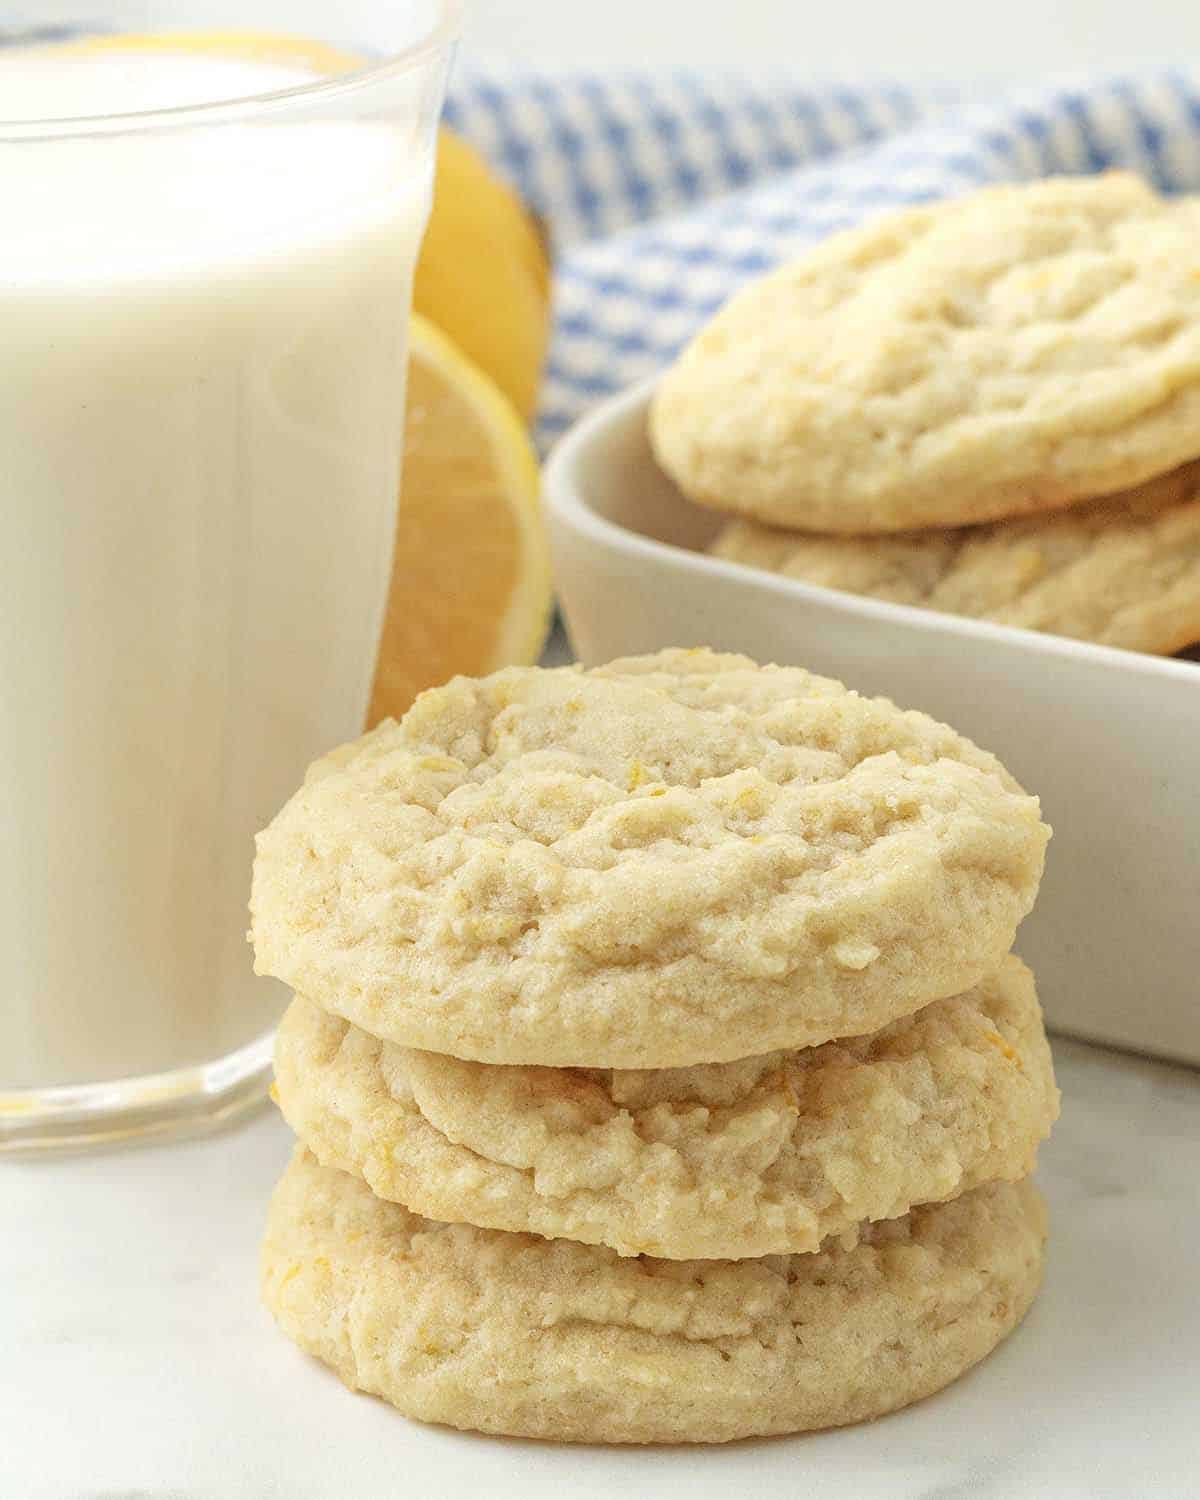 Three lemon cookies stacked on each other, a glass of milk and more cookies sit in the background.